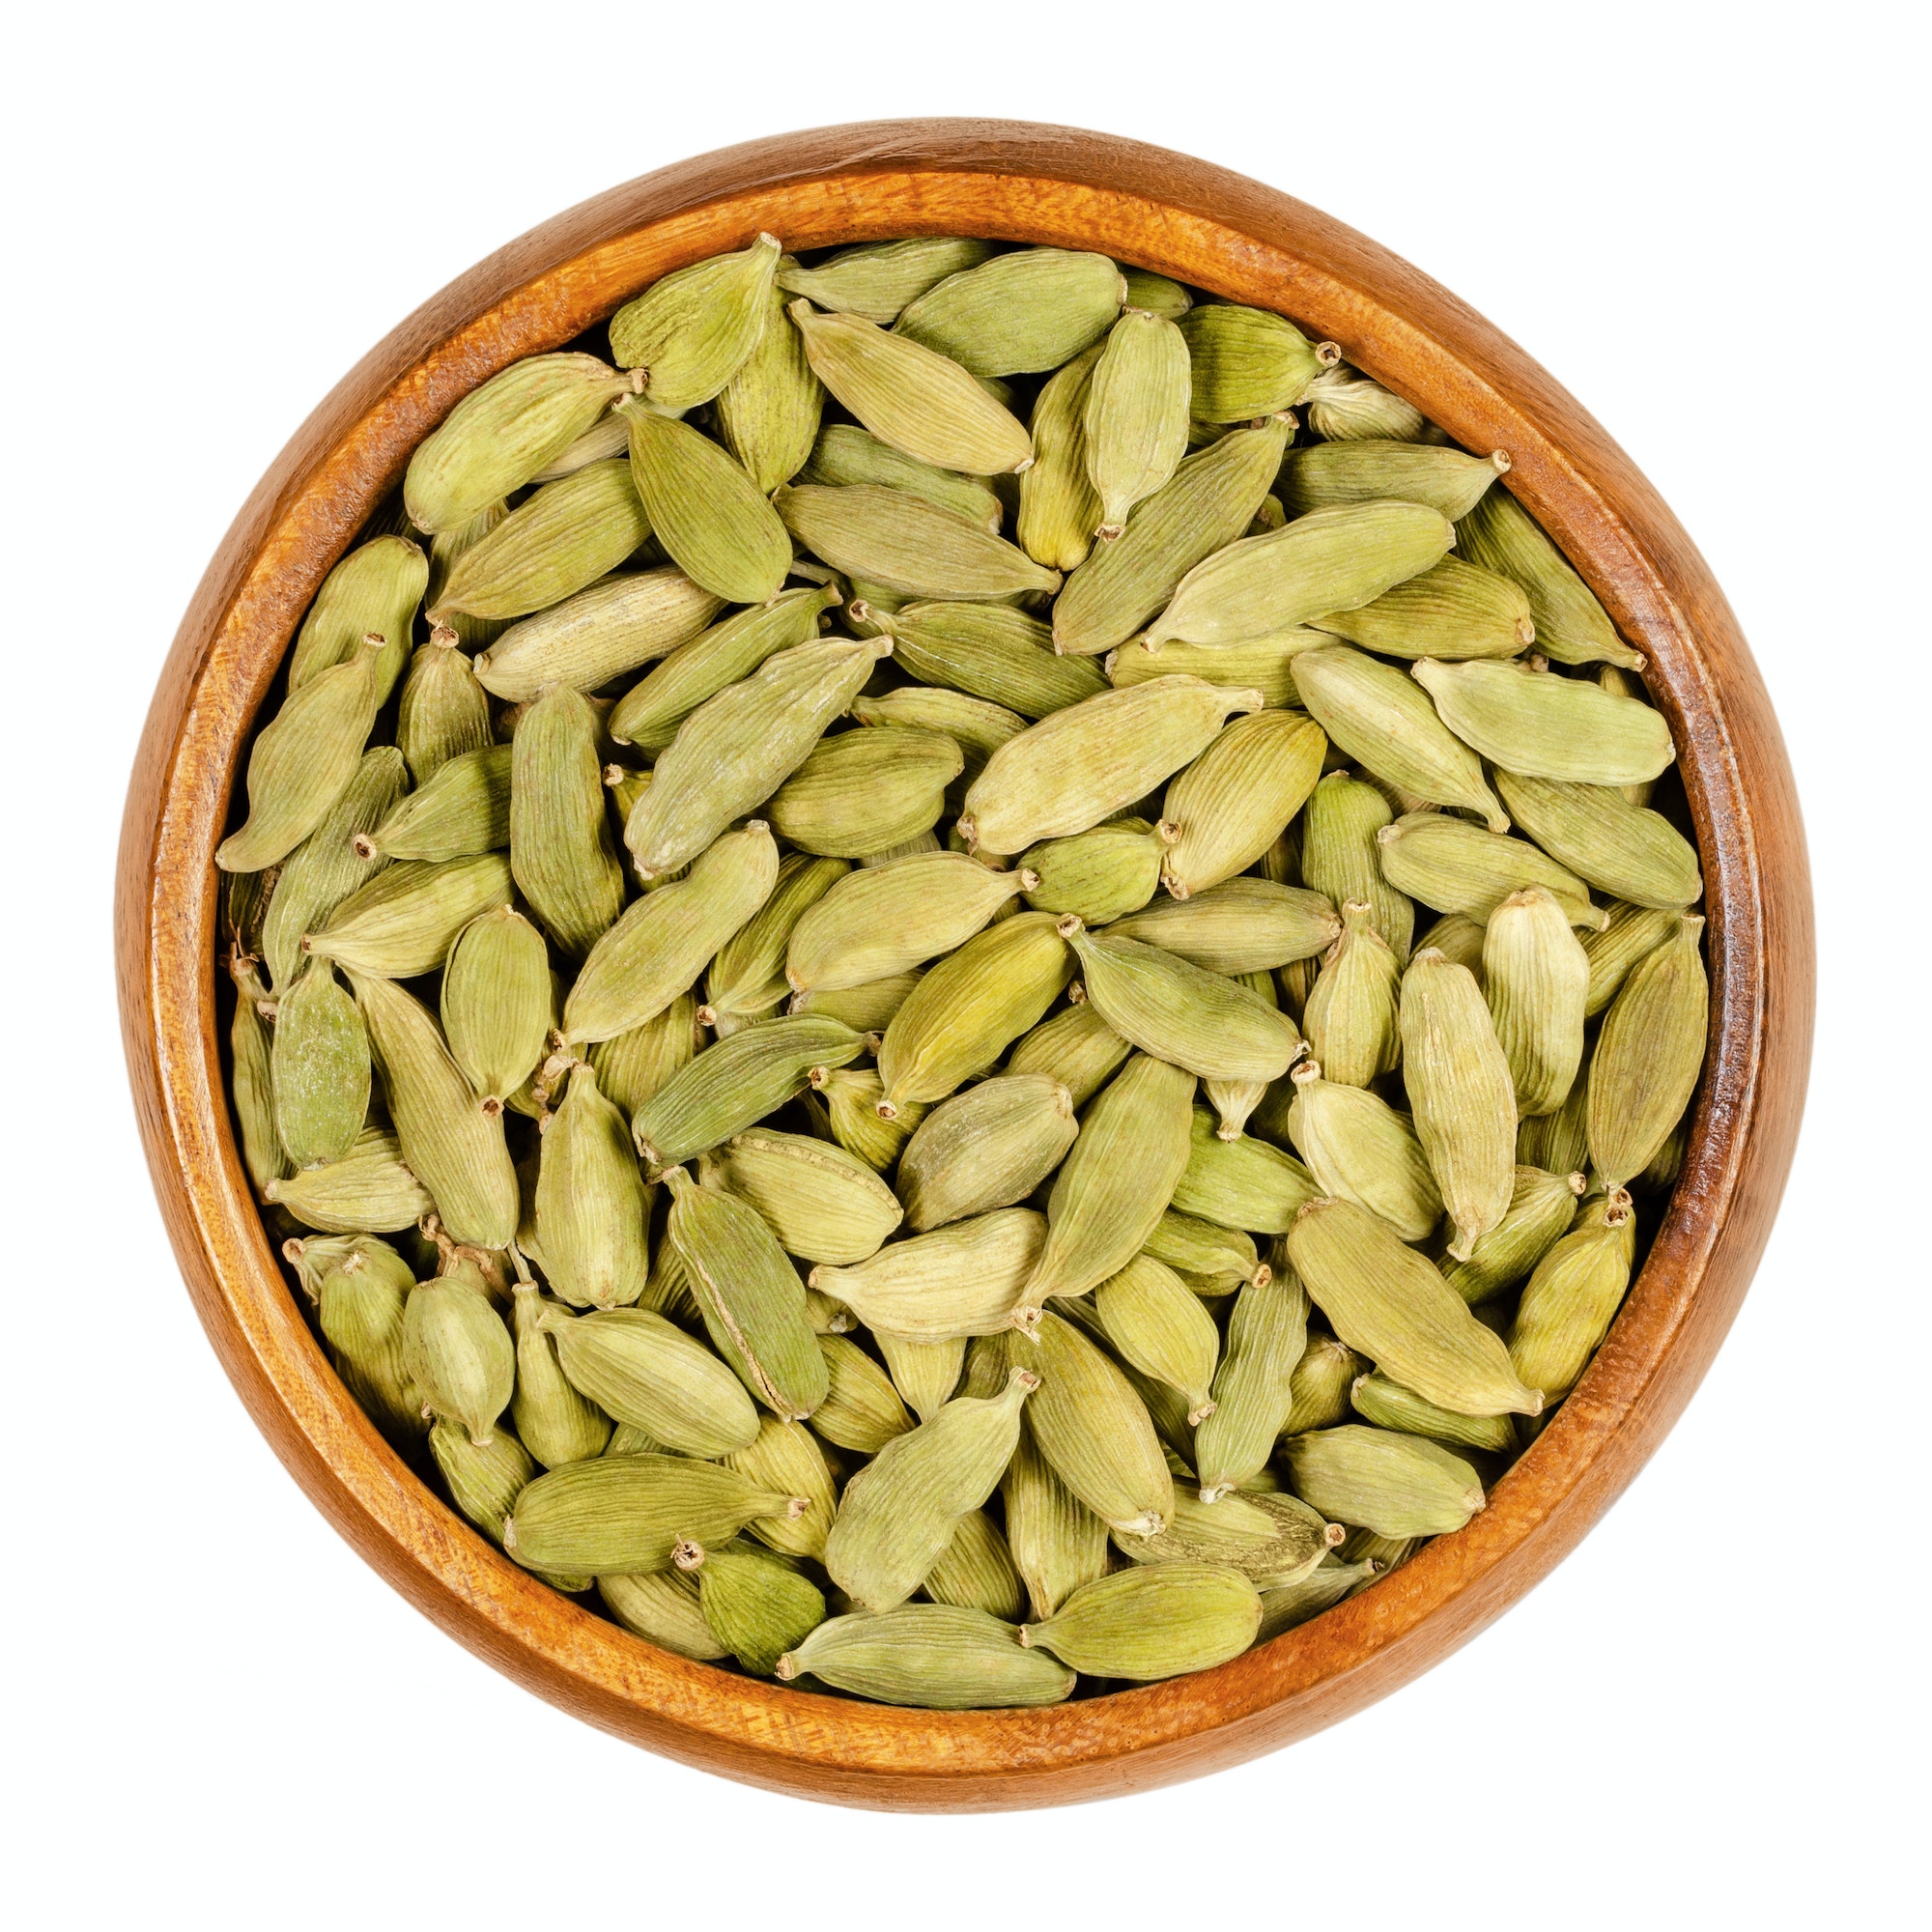 Green cardamom pods, processed true cardamom seeds, in a wooden bowl